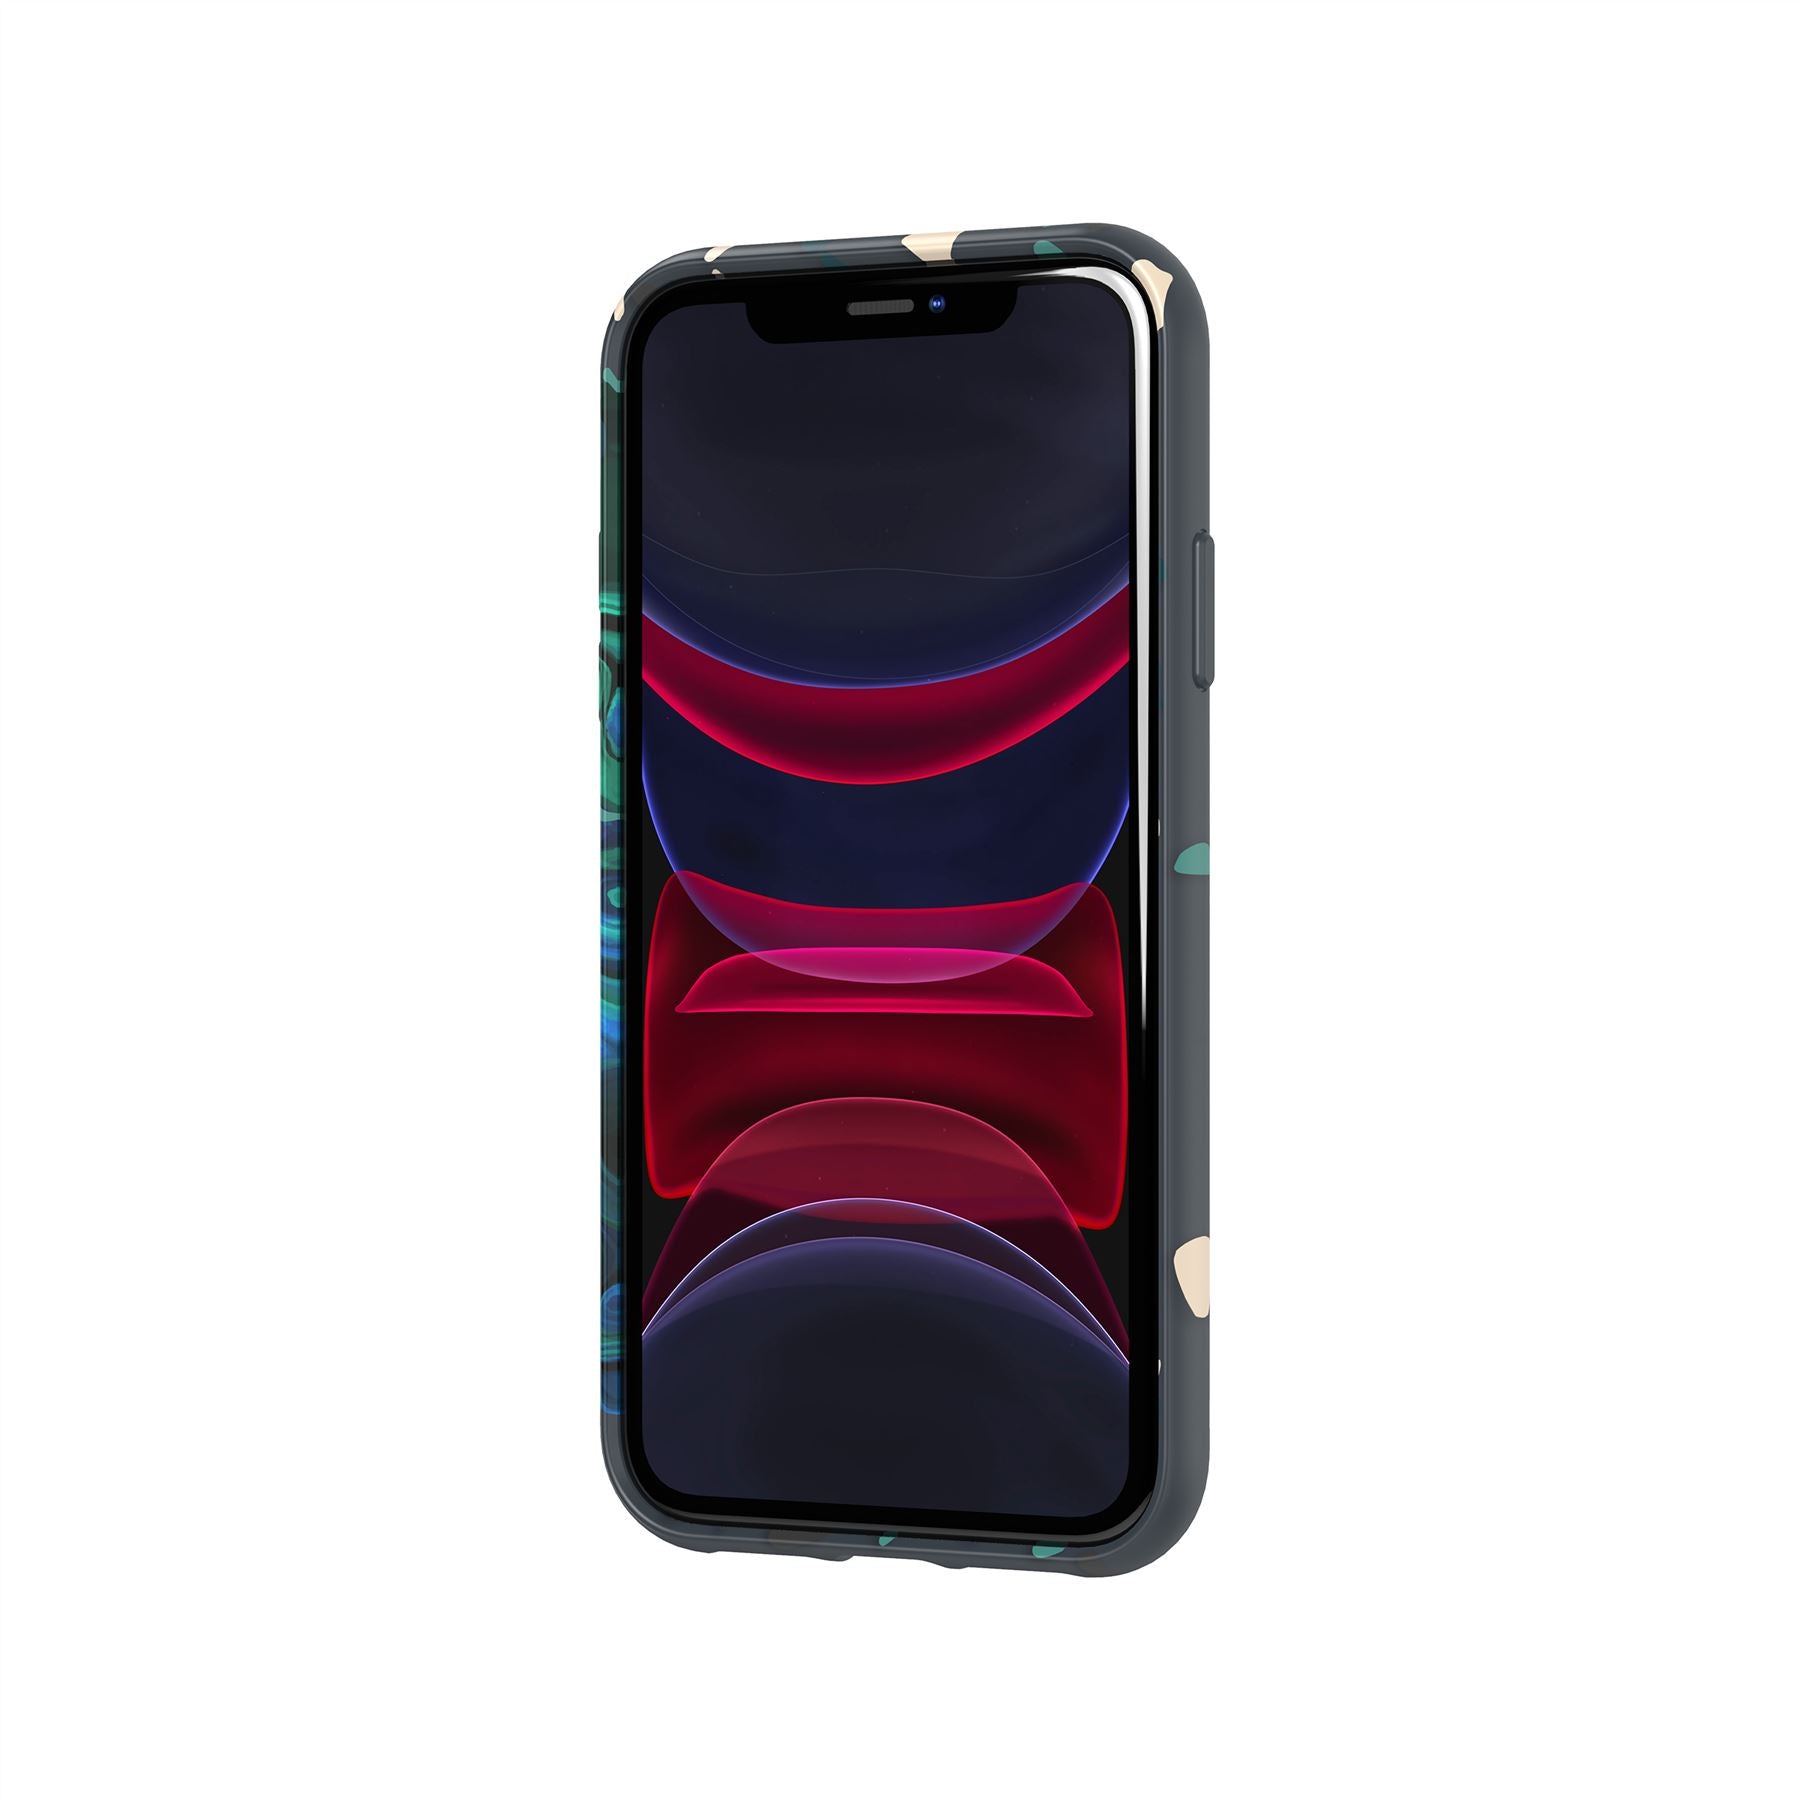 Remix in Motion - Apple iPhone 11 Case - Slate